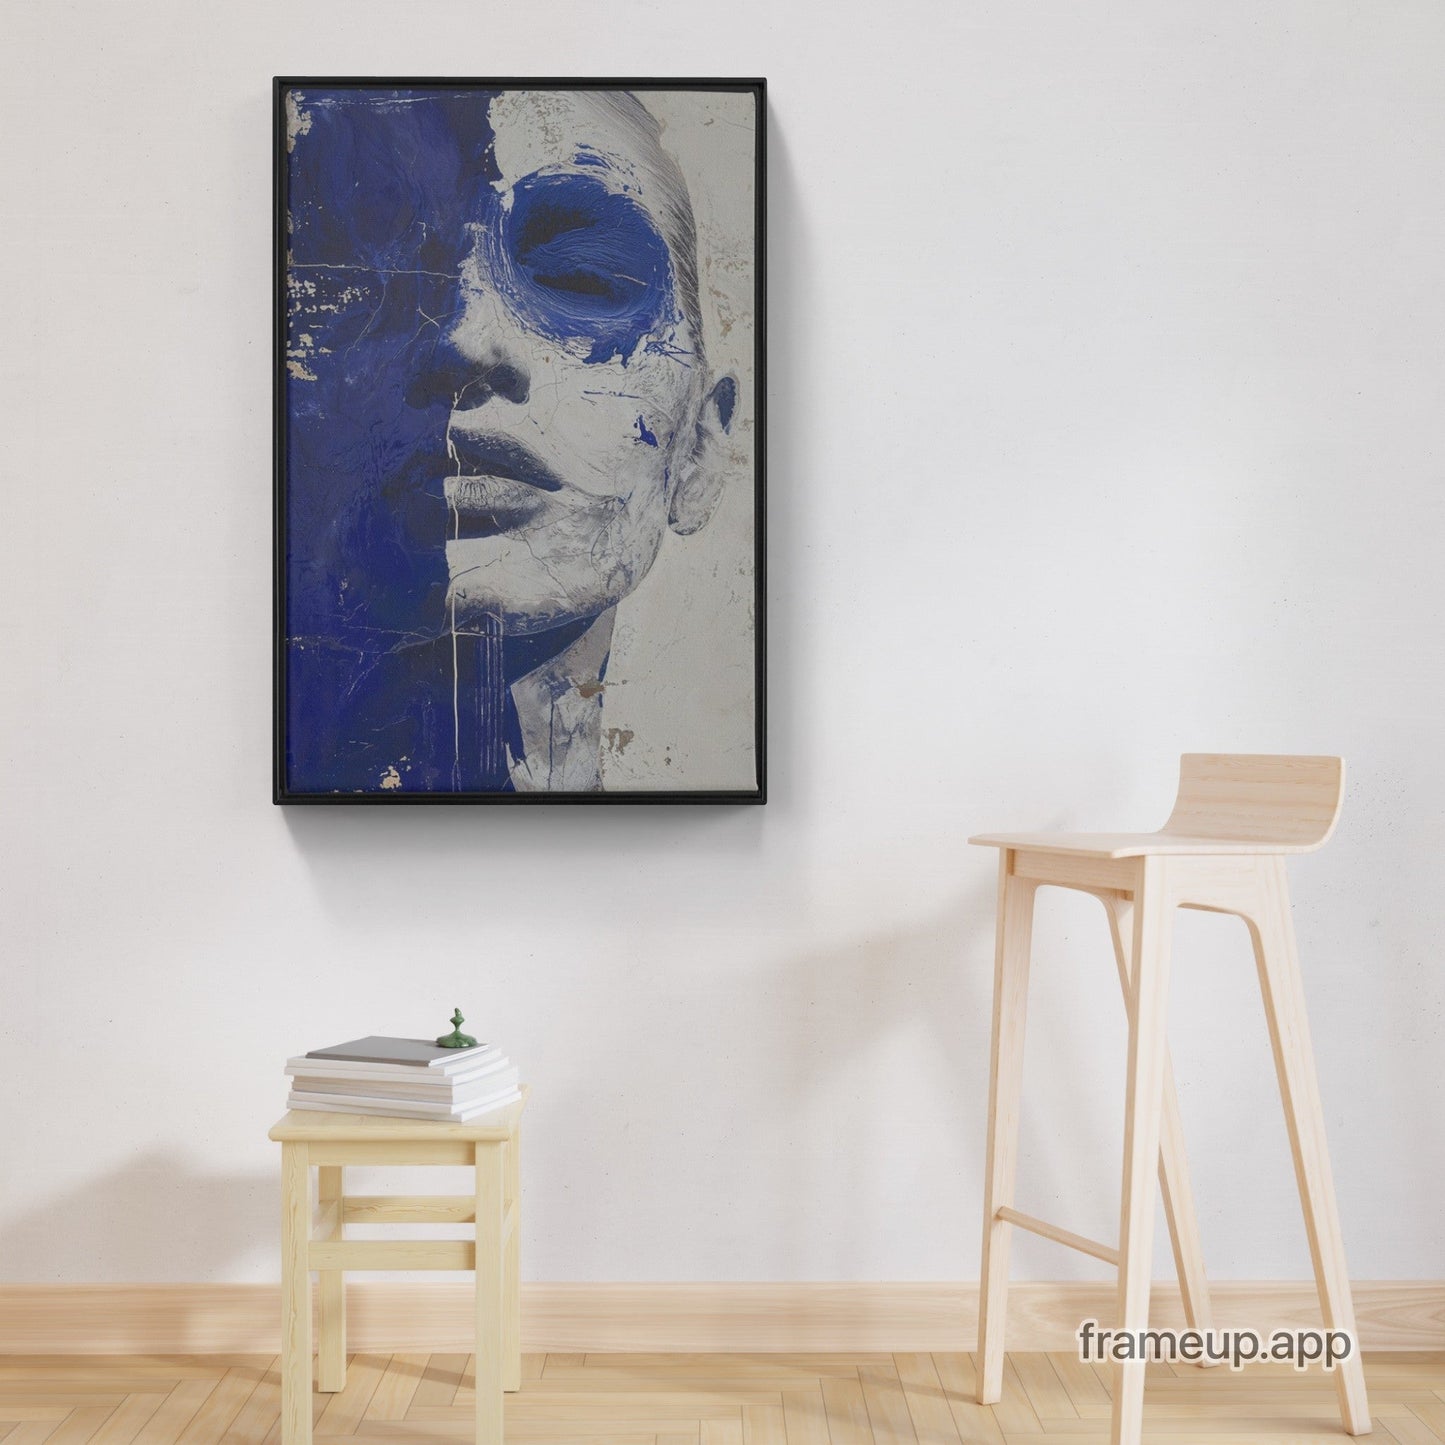 This Portrait In Deep Blue - XXL Framed Canvas Wraps, with a hardwood frame, hangs on the wall.